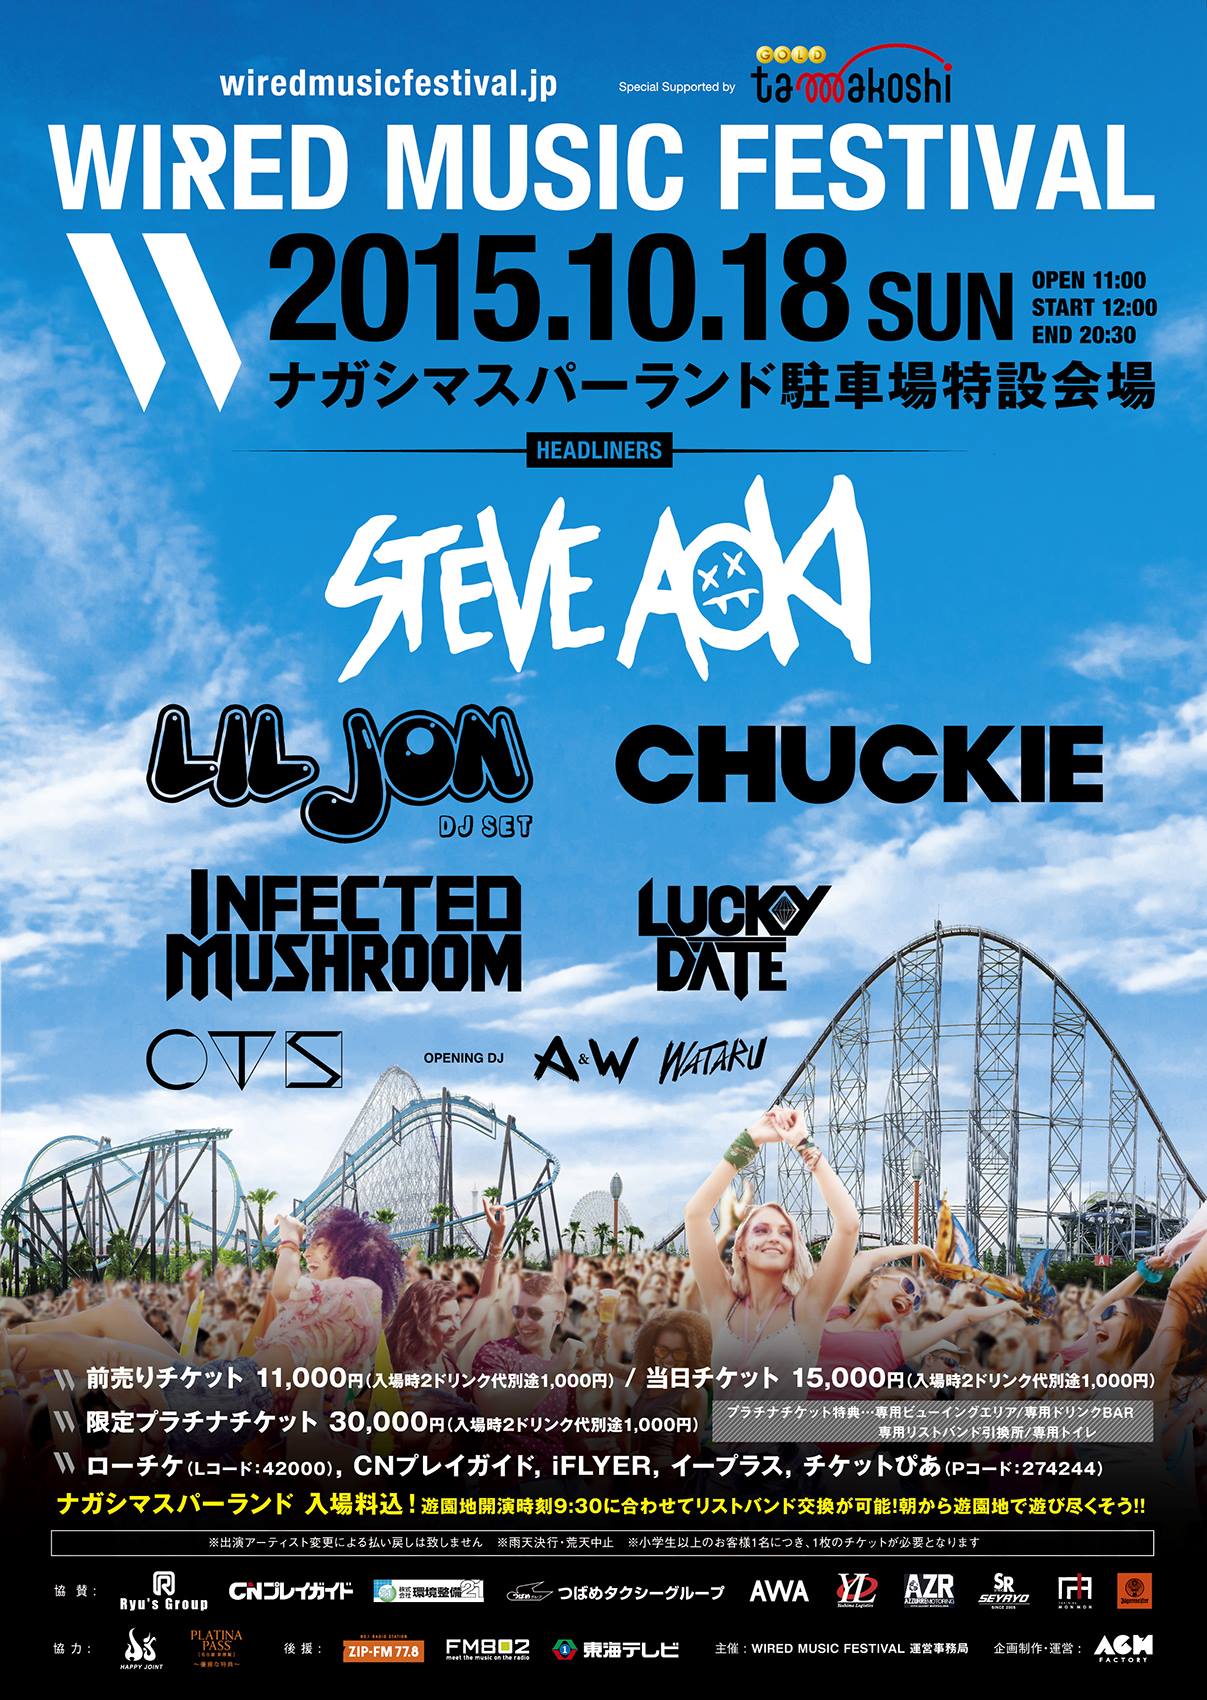 WIRED MUSIC FESTIVAL 2015